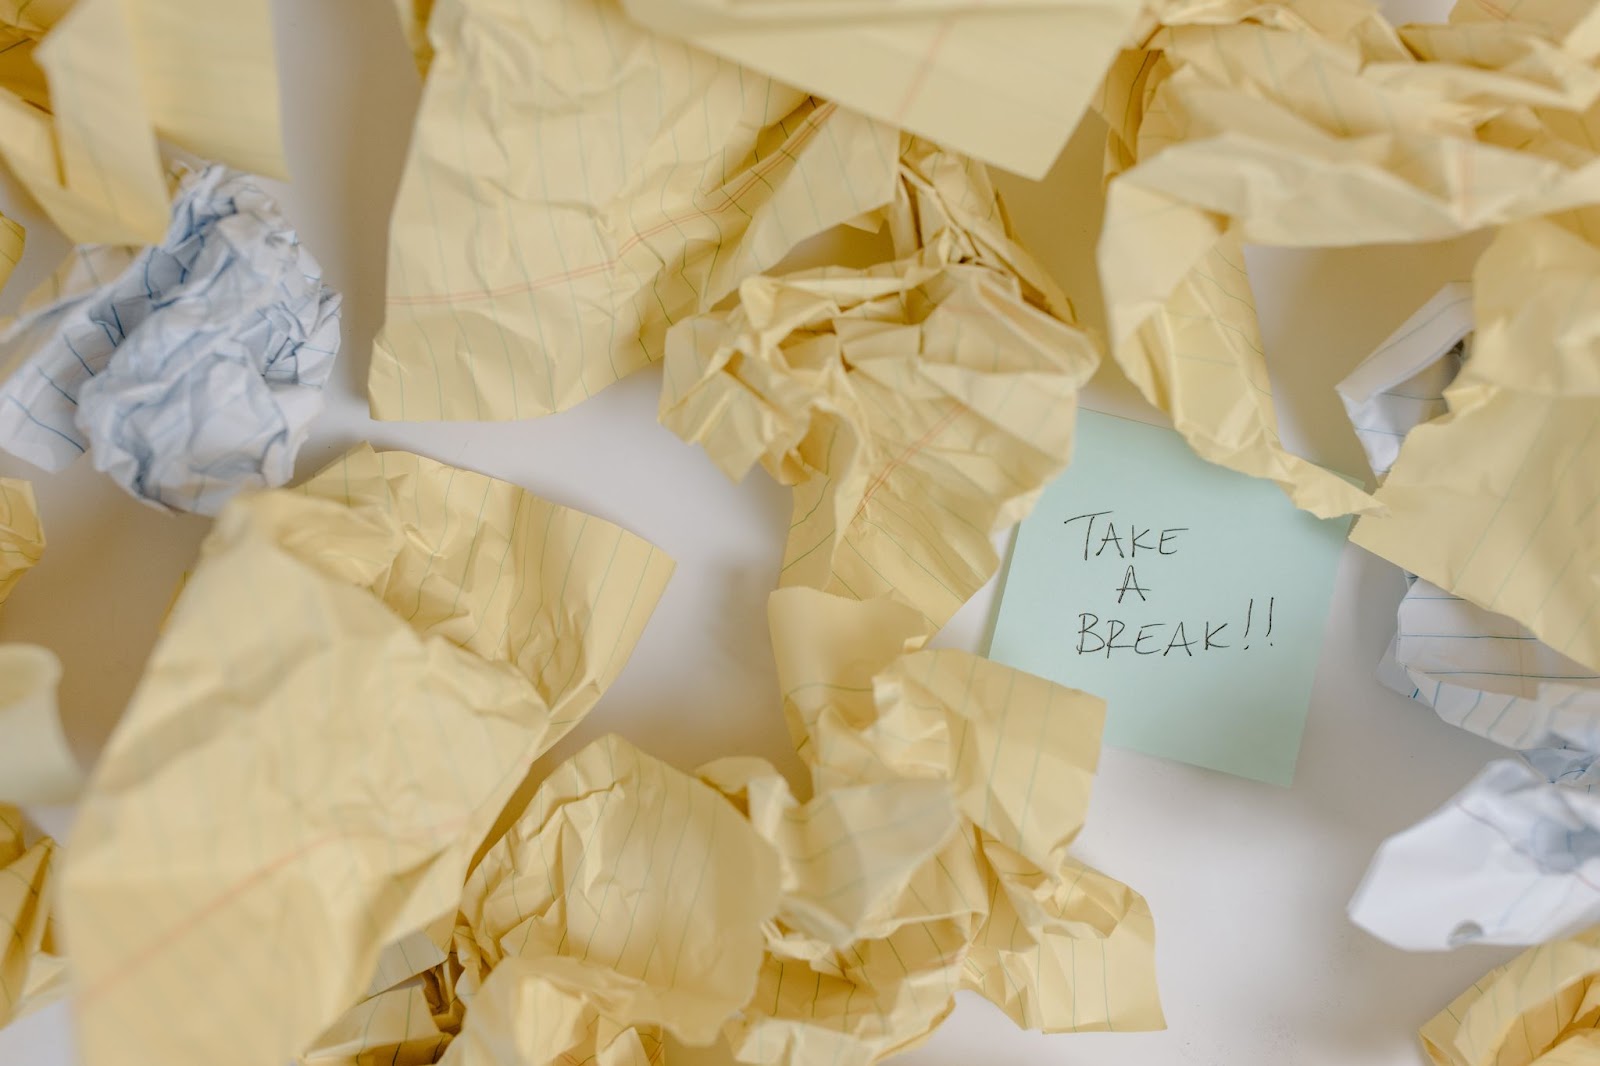 crumpled papers and sticky notes, one saying "take a break!!"